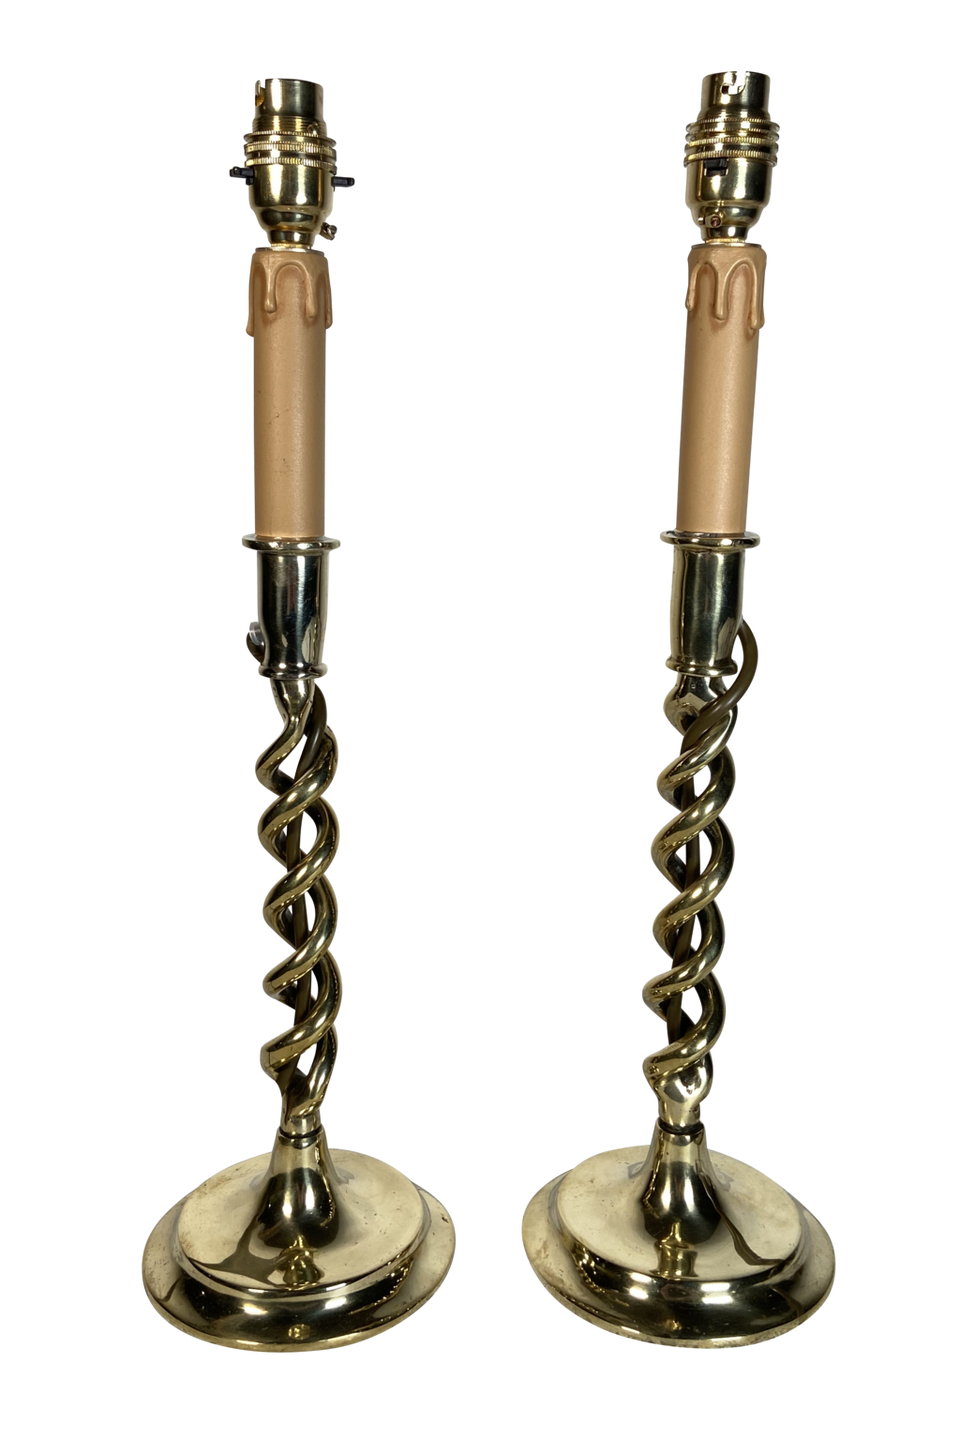 Wrythen Twist Candlestick converted Table Lamps